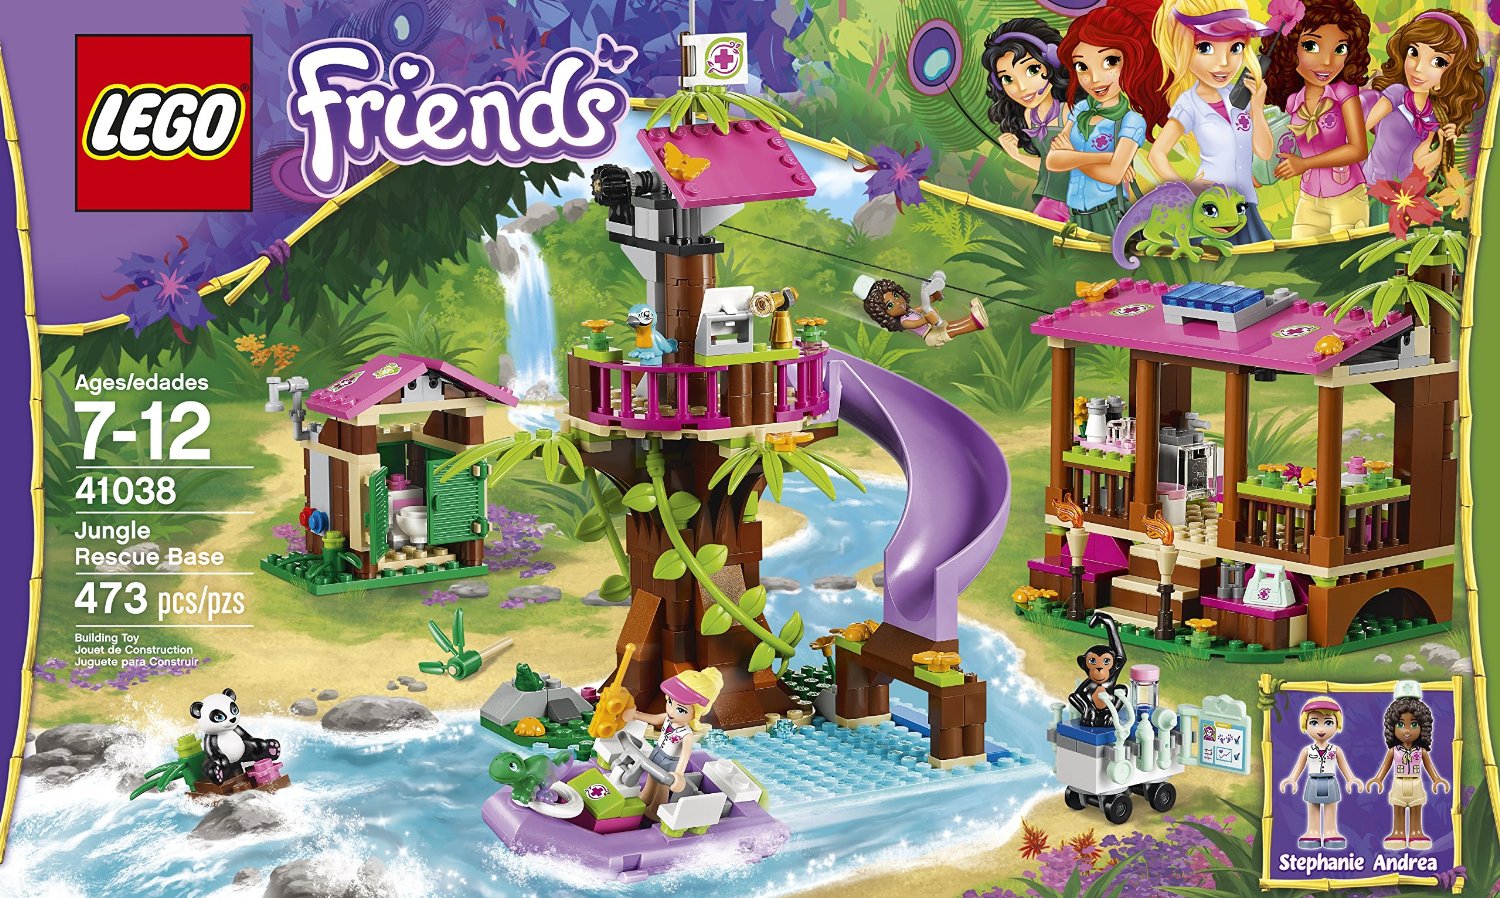 Shopping For LEGO Friends Jungle Rescue Base 41038 ...